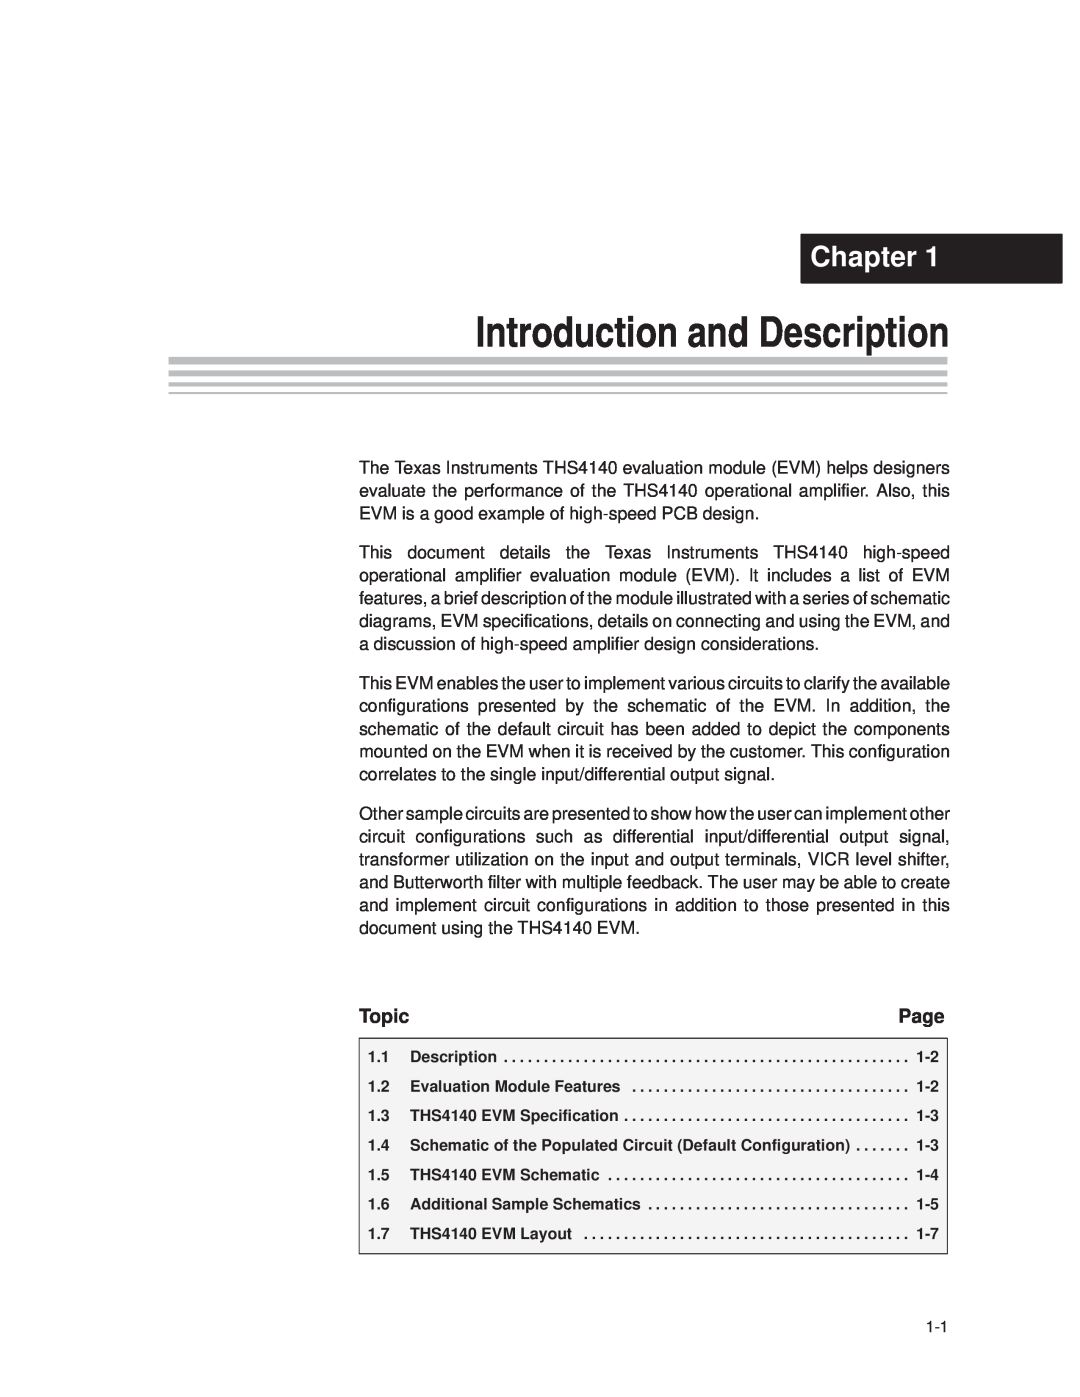 Texas Instruments SLOU106 manual Introduction and Description, Chapter, Page, Topic 